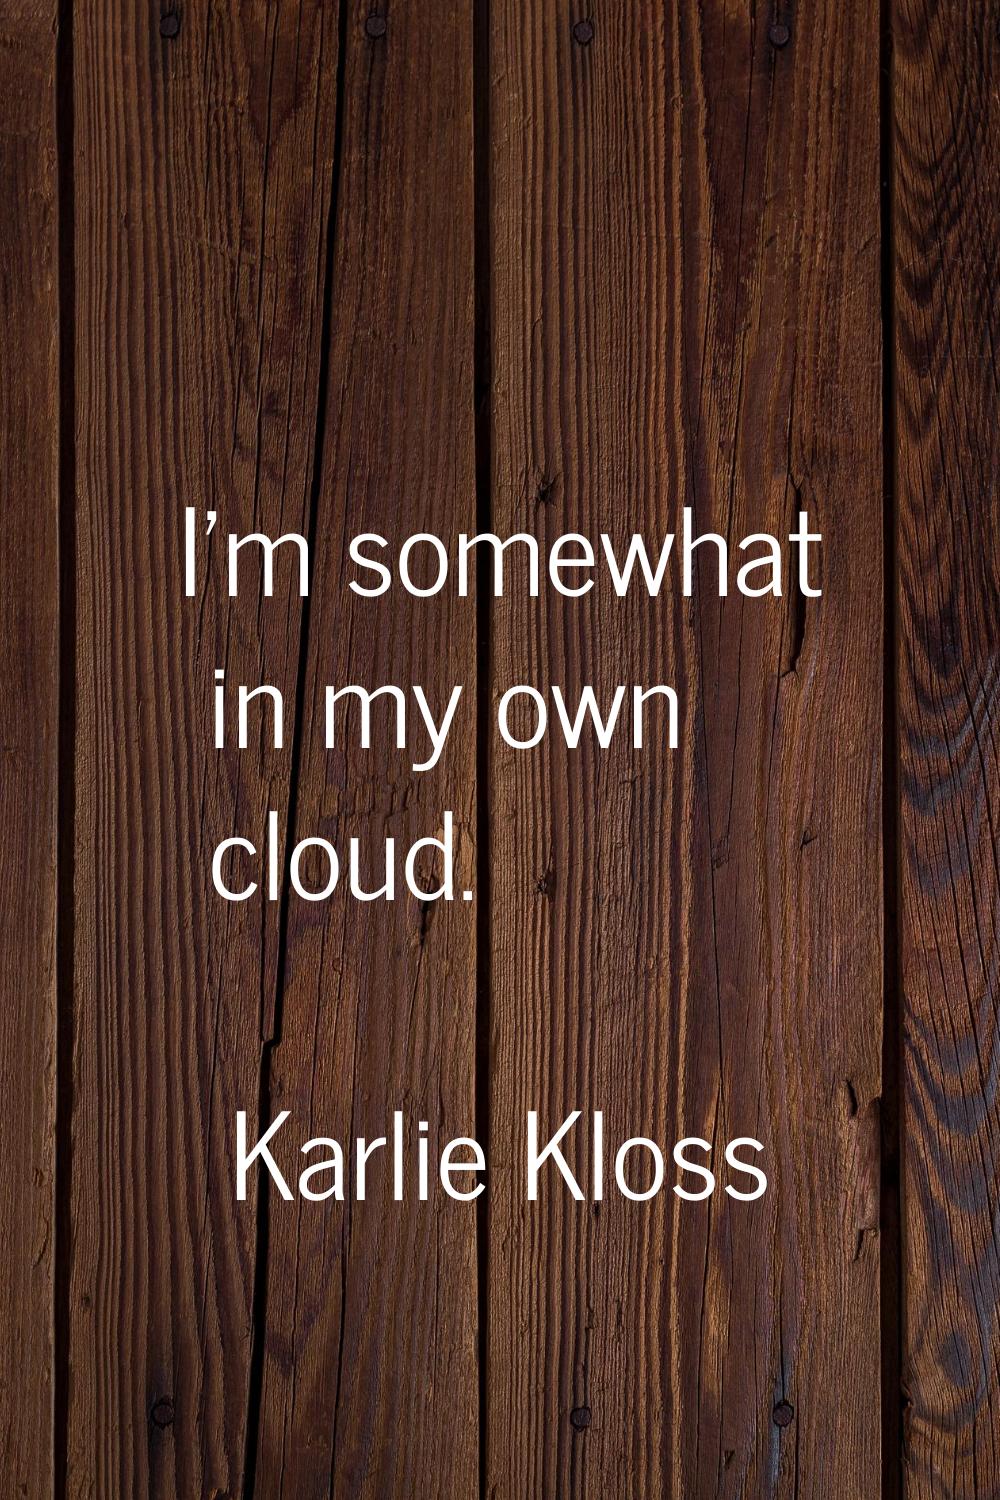 I'm somewhat in my own cloud.